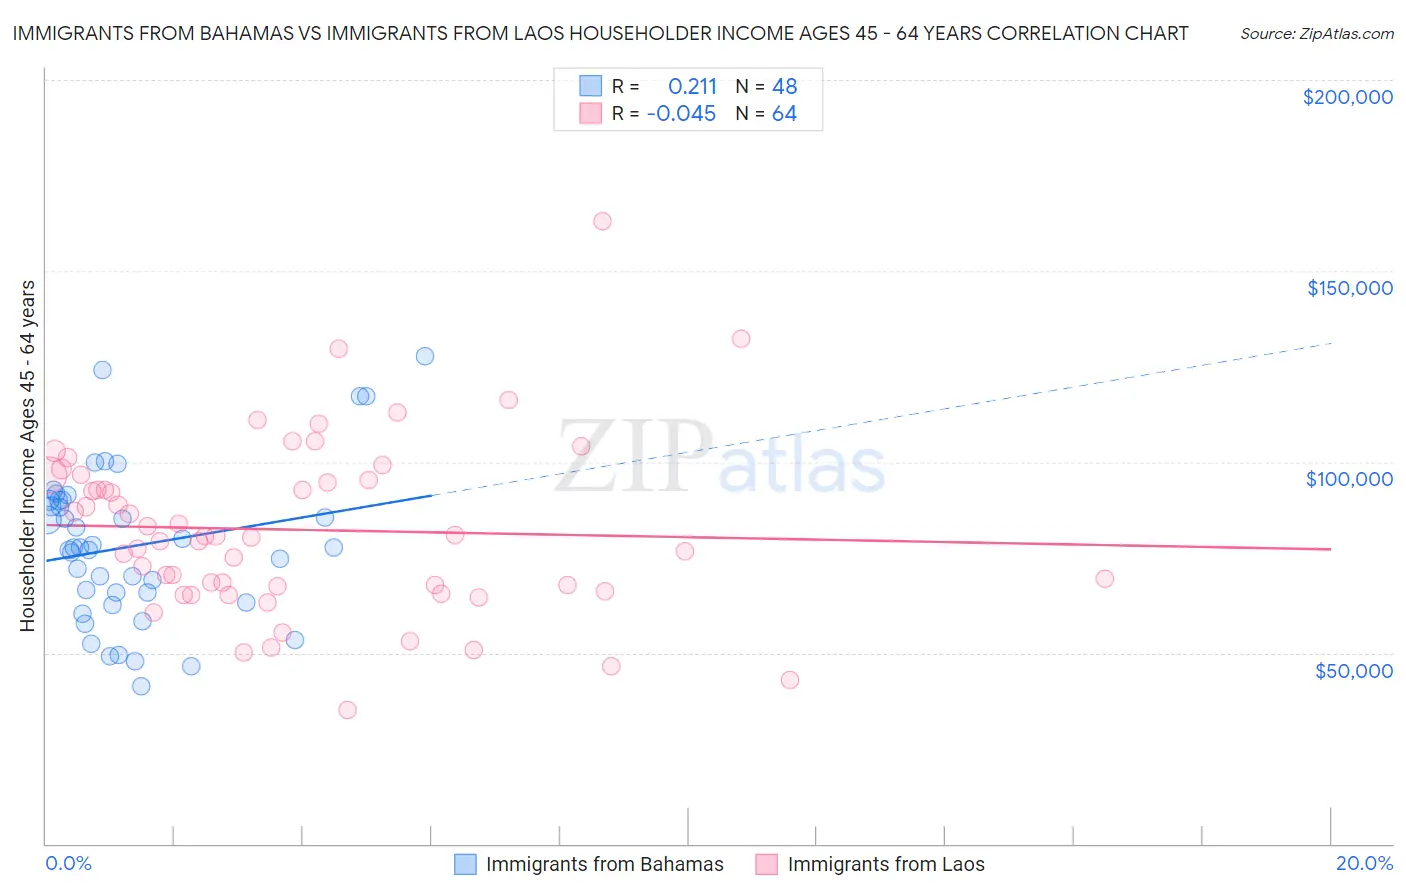 Immigrants from Bahamas vs Immigrants from Laos Householder Income Ages 45 - 64 years